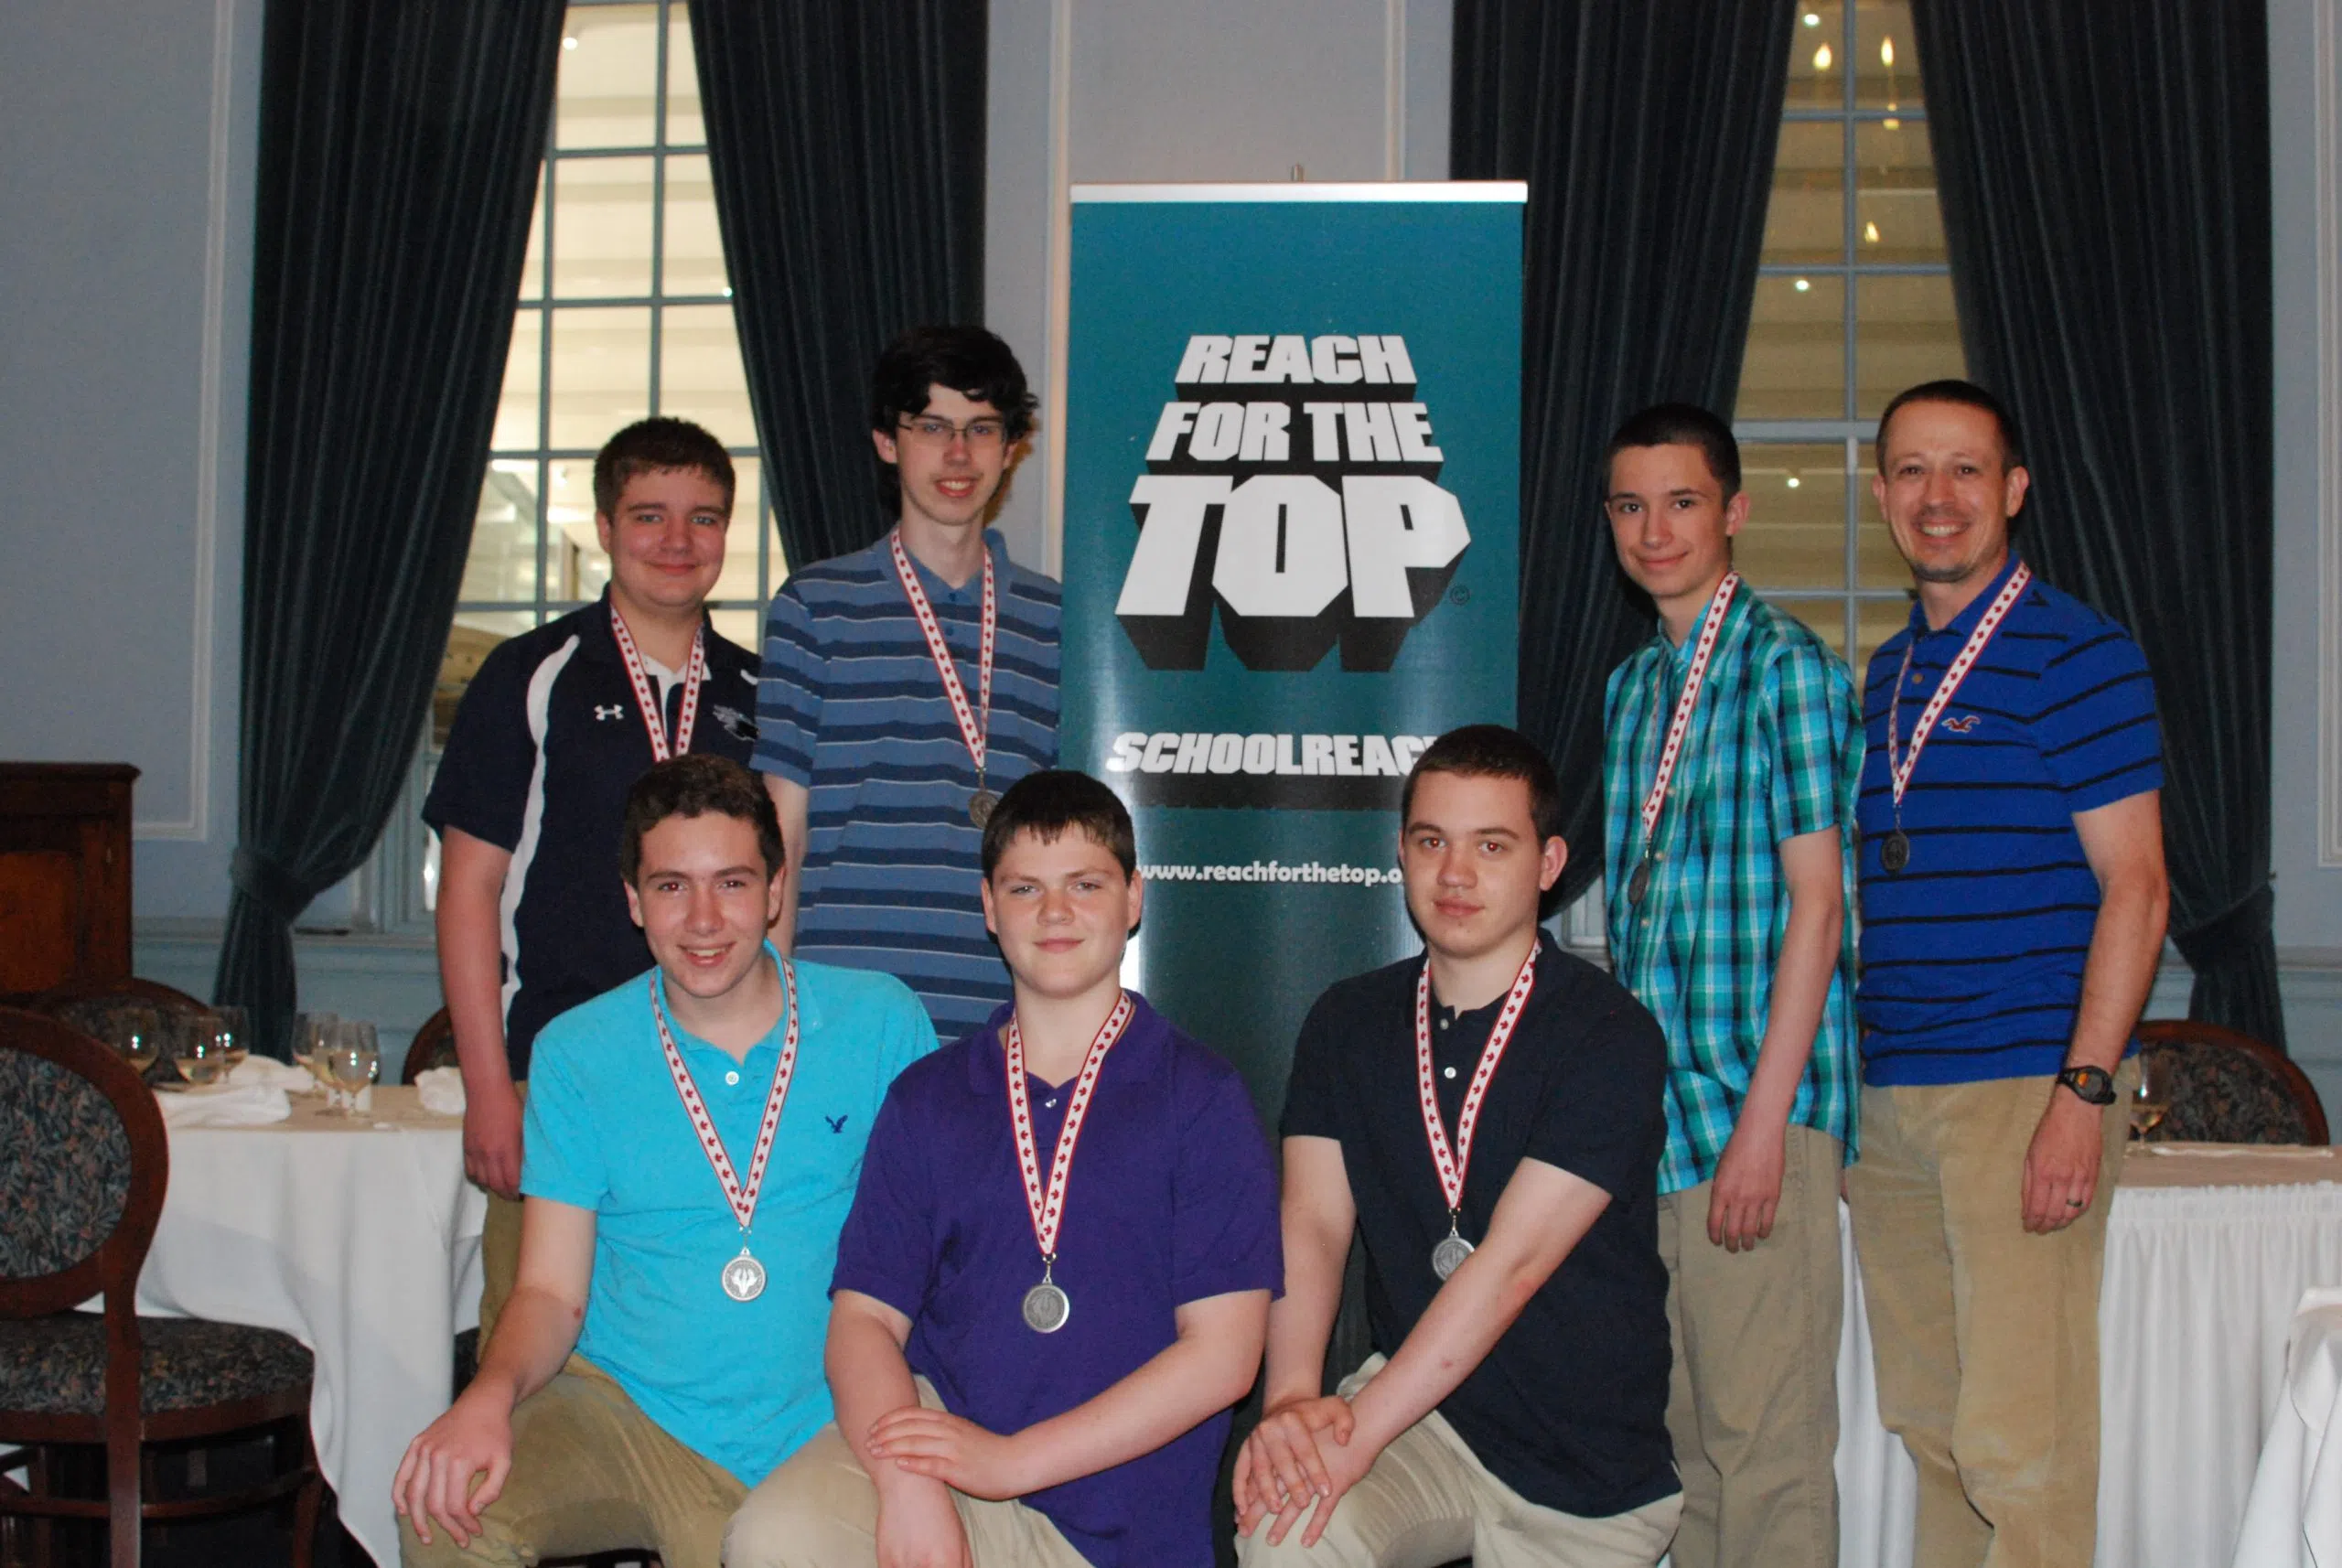 K-V-H-S Wins Silver At Reach For The Top